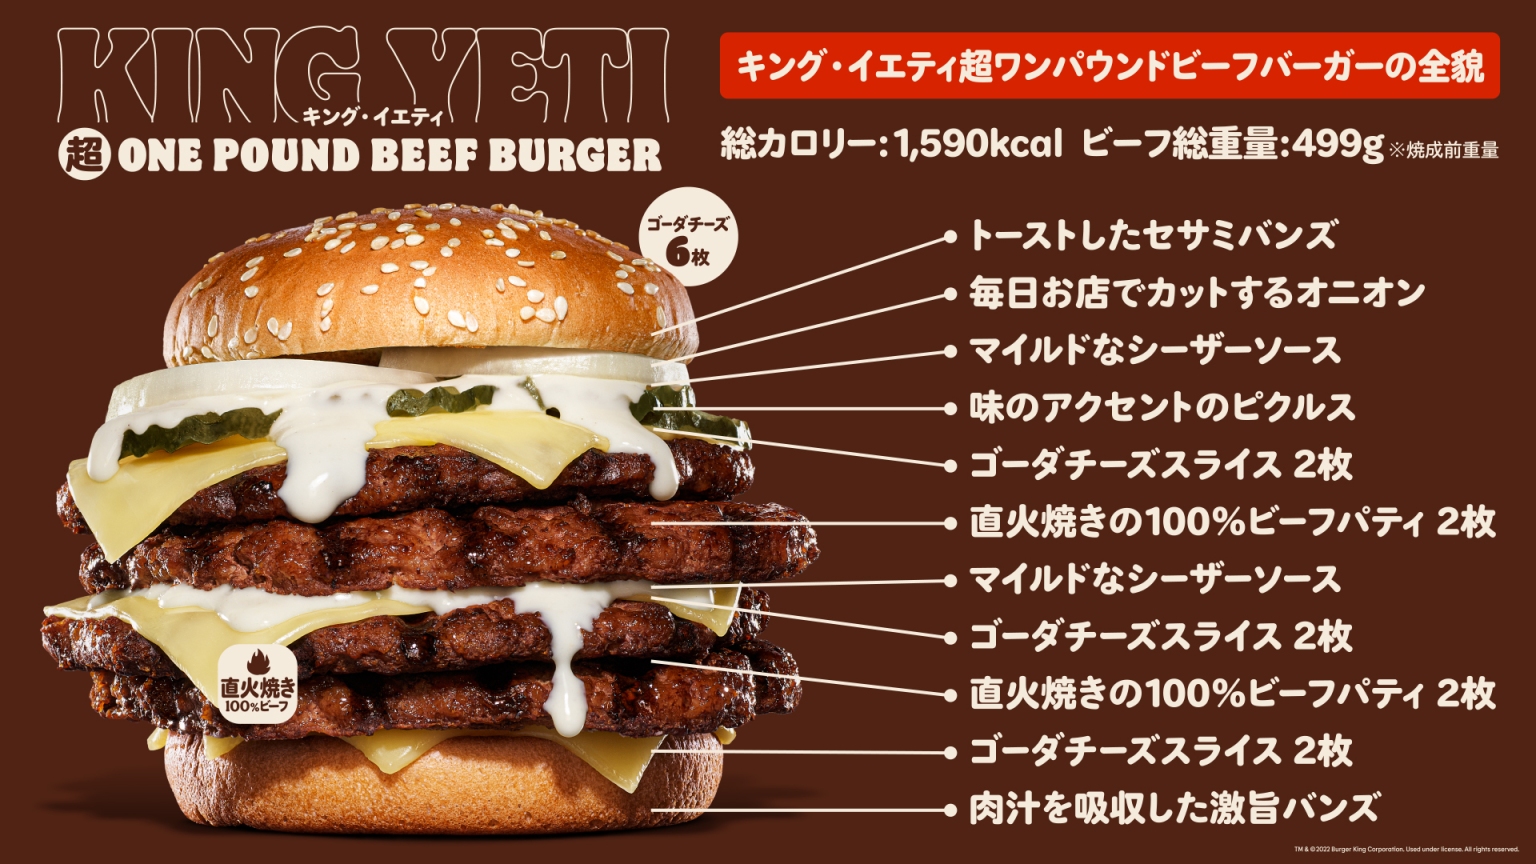 Burger-King-Japan-Yeti-One-pound-beef-limited-edition-menu-fast-food-exclusive-news-photos-2.jpg